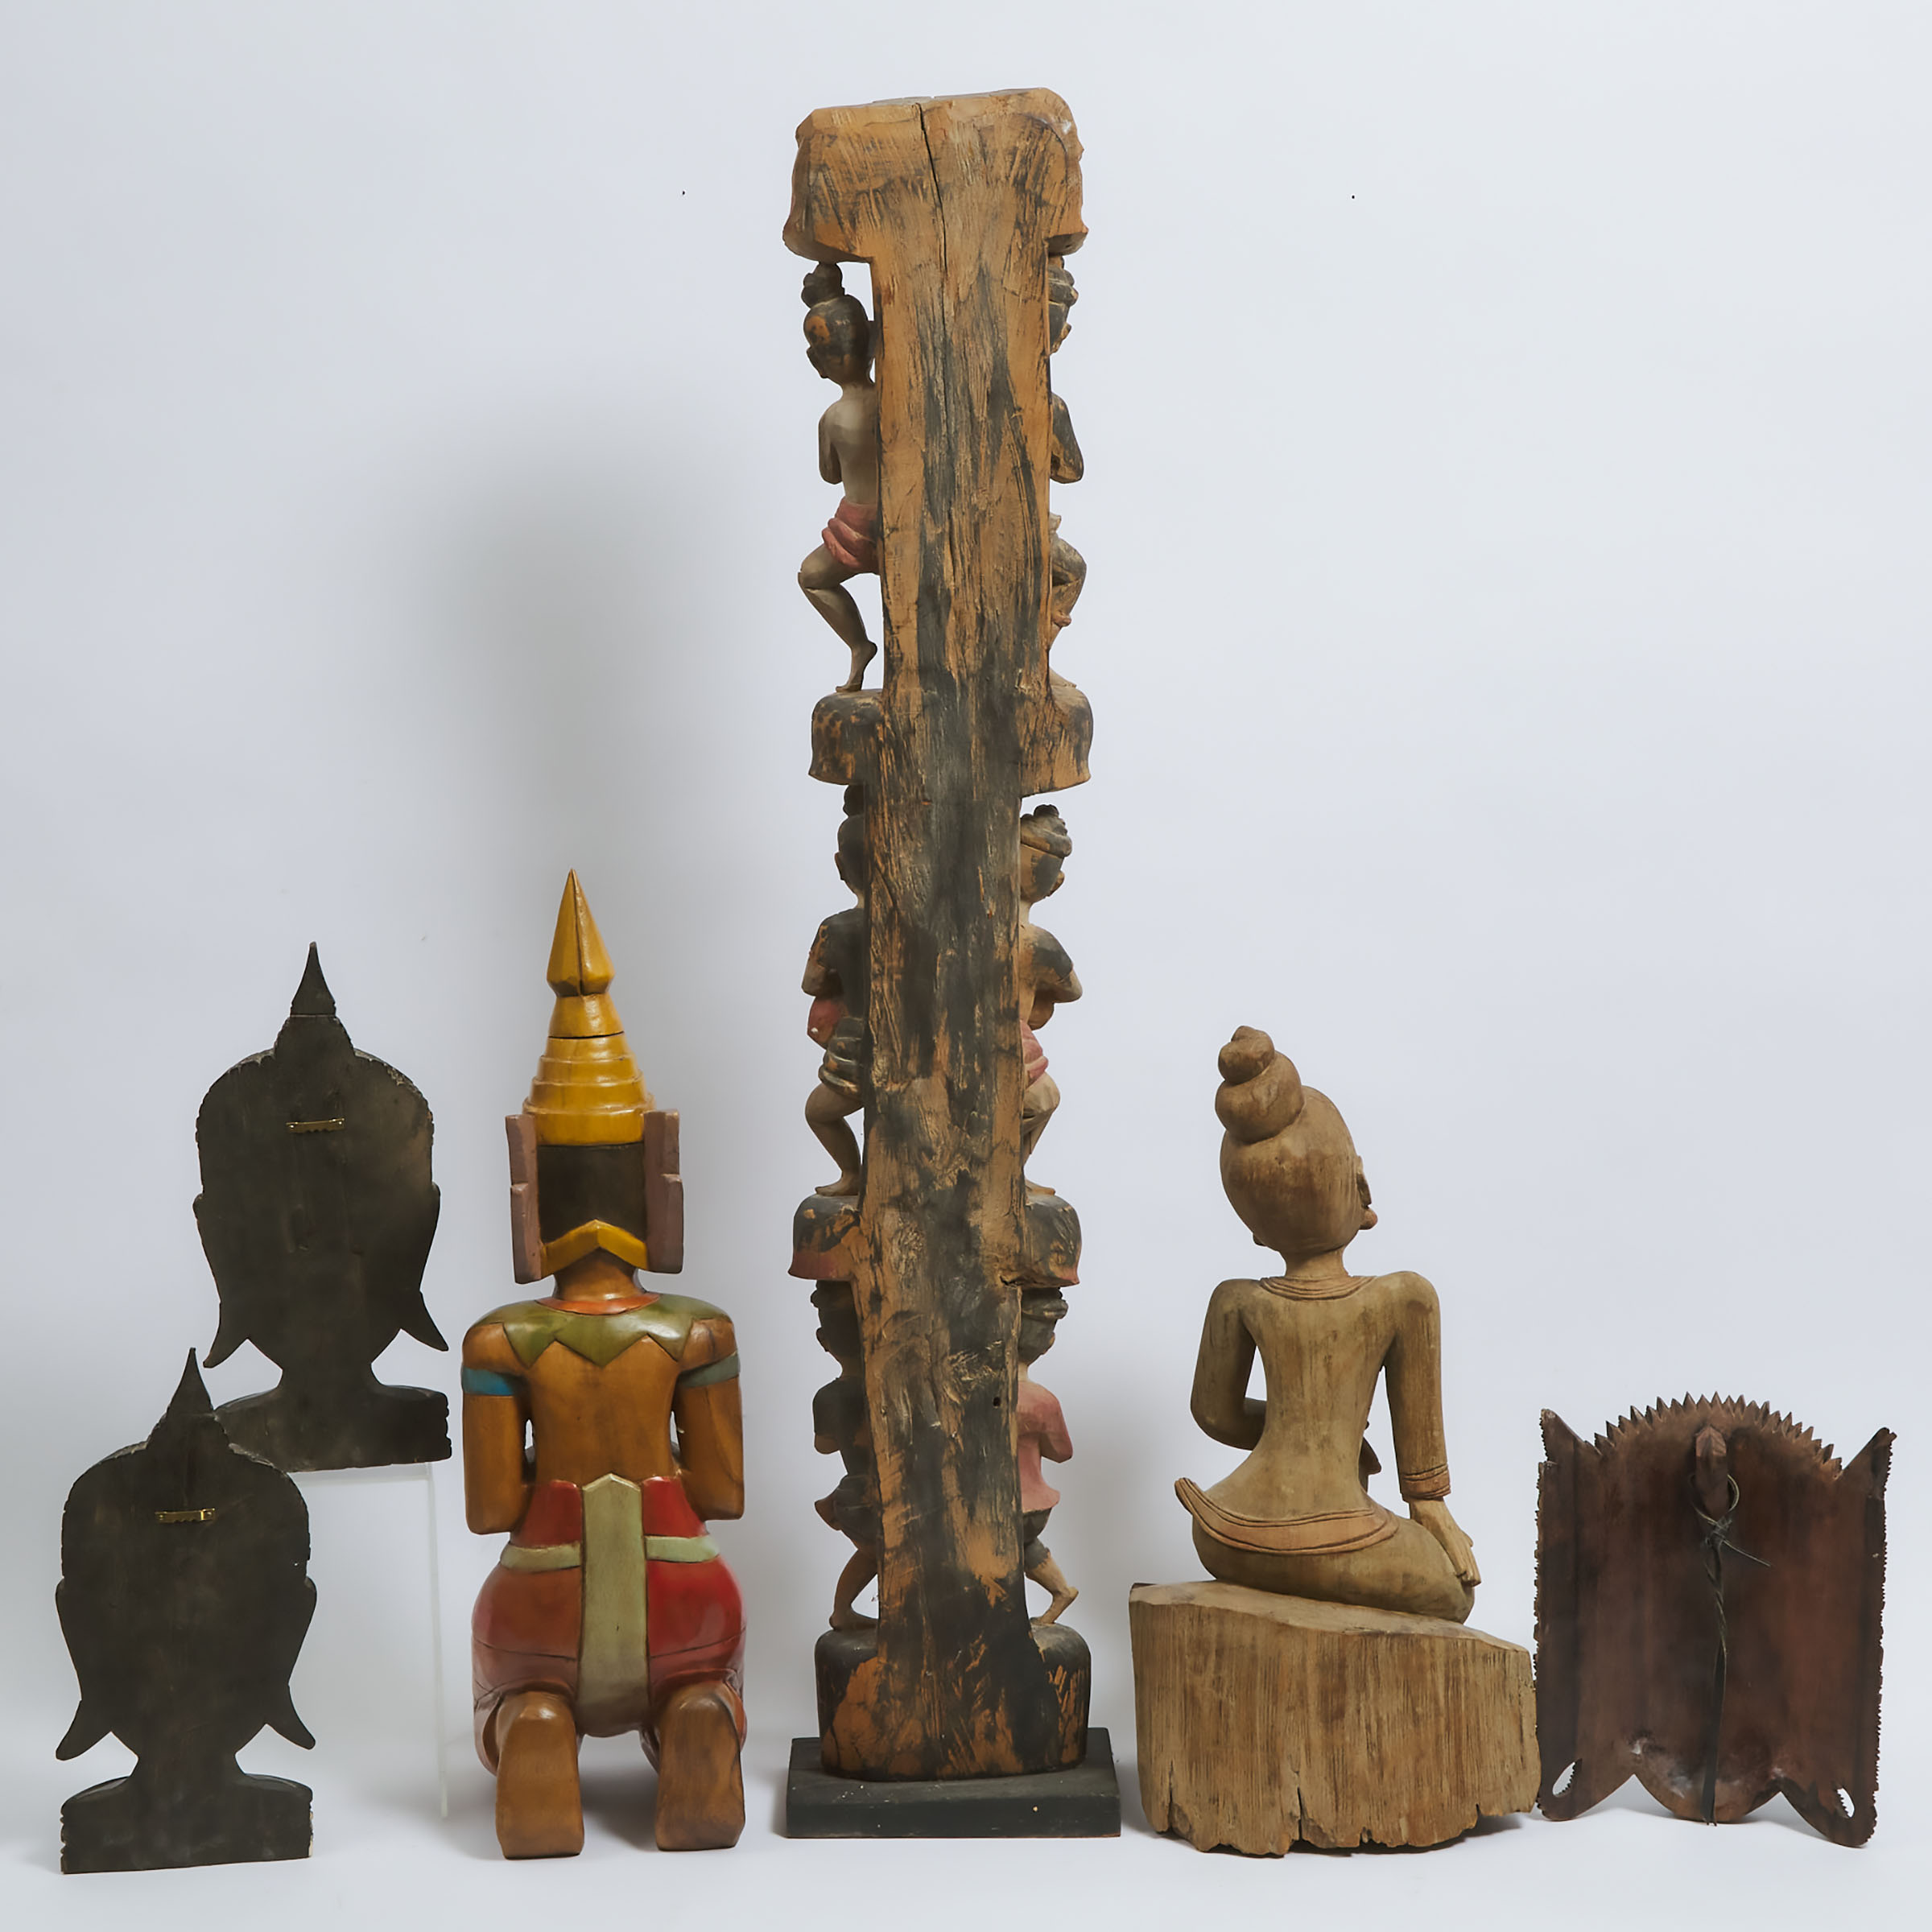 A Group of Six Large Thai/Southeast Asian Wood Carvings